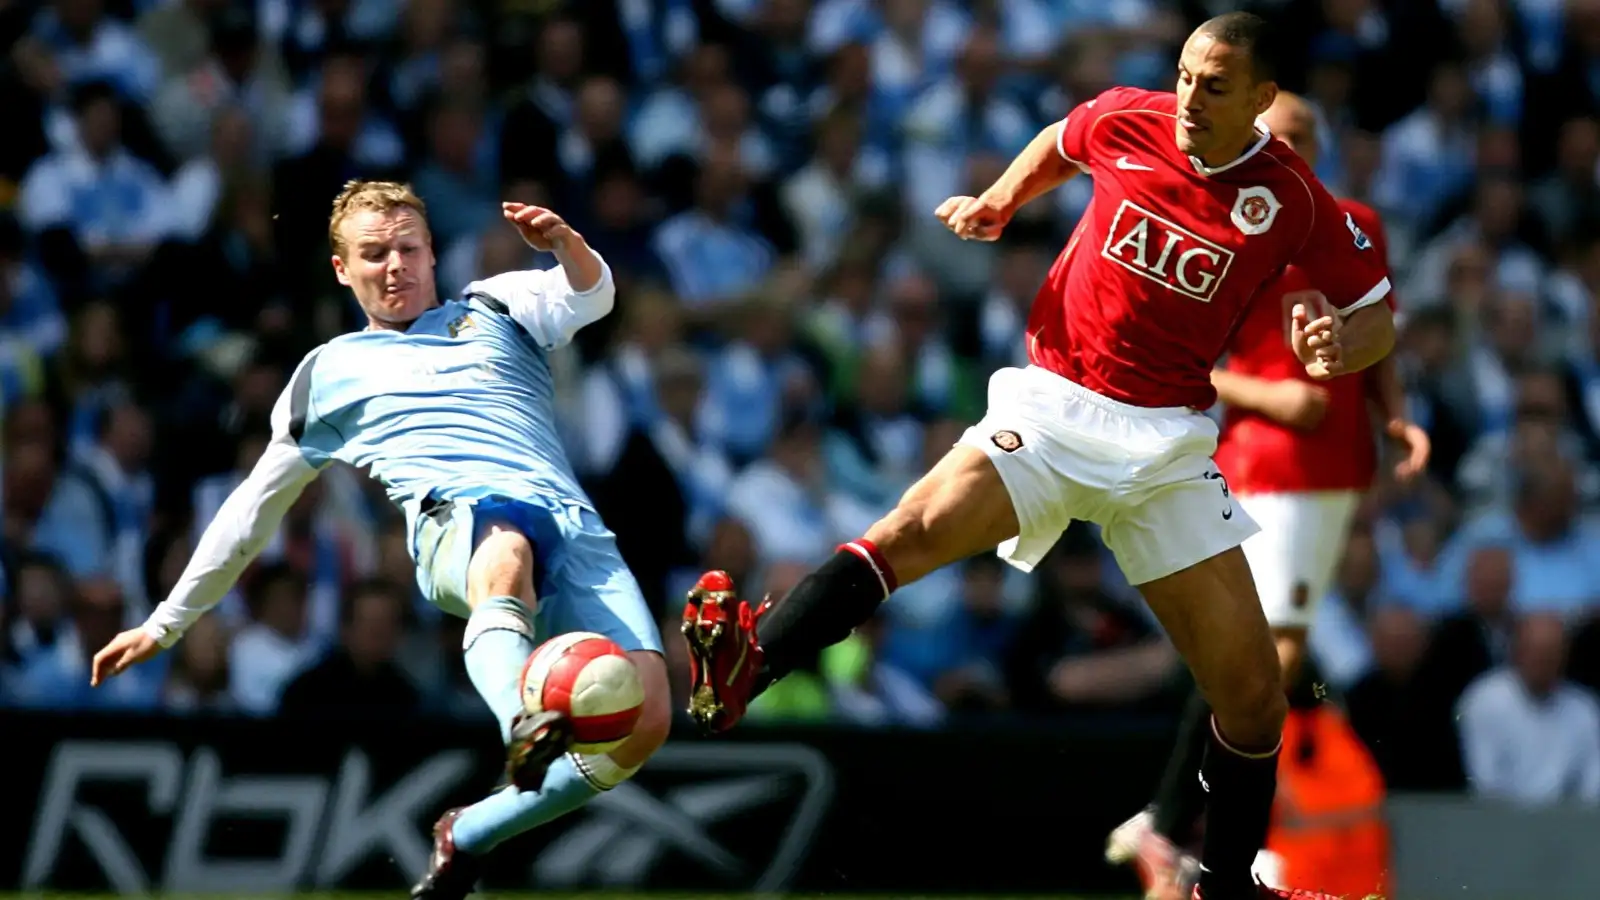 Michael Ball: Man City targeted Rio Ferdinand to win derby in 2008